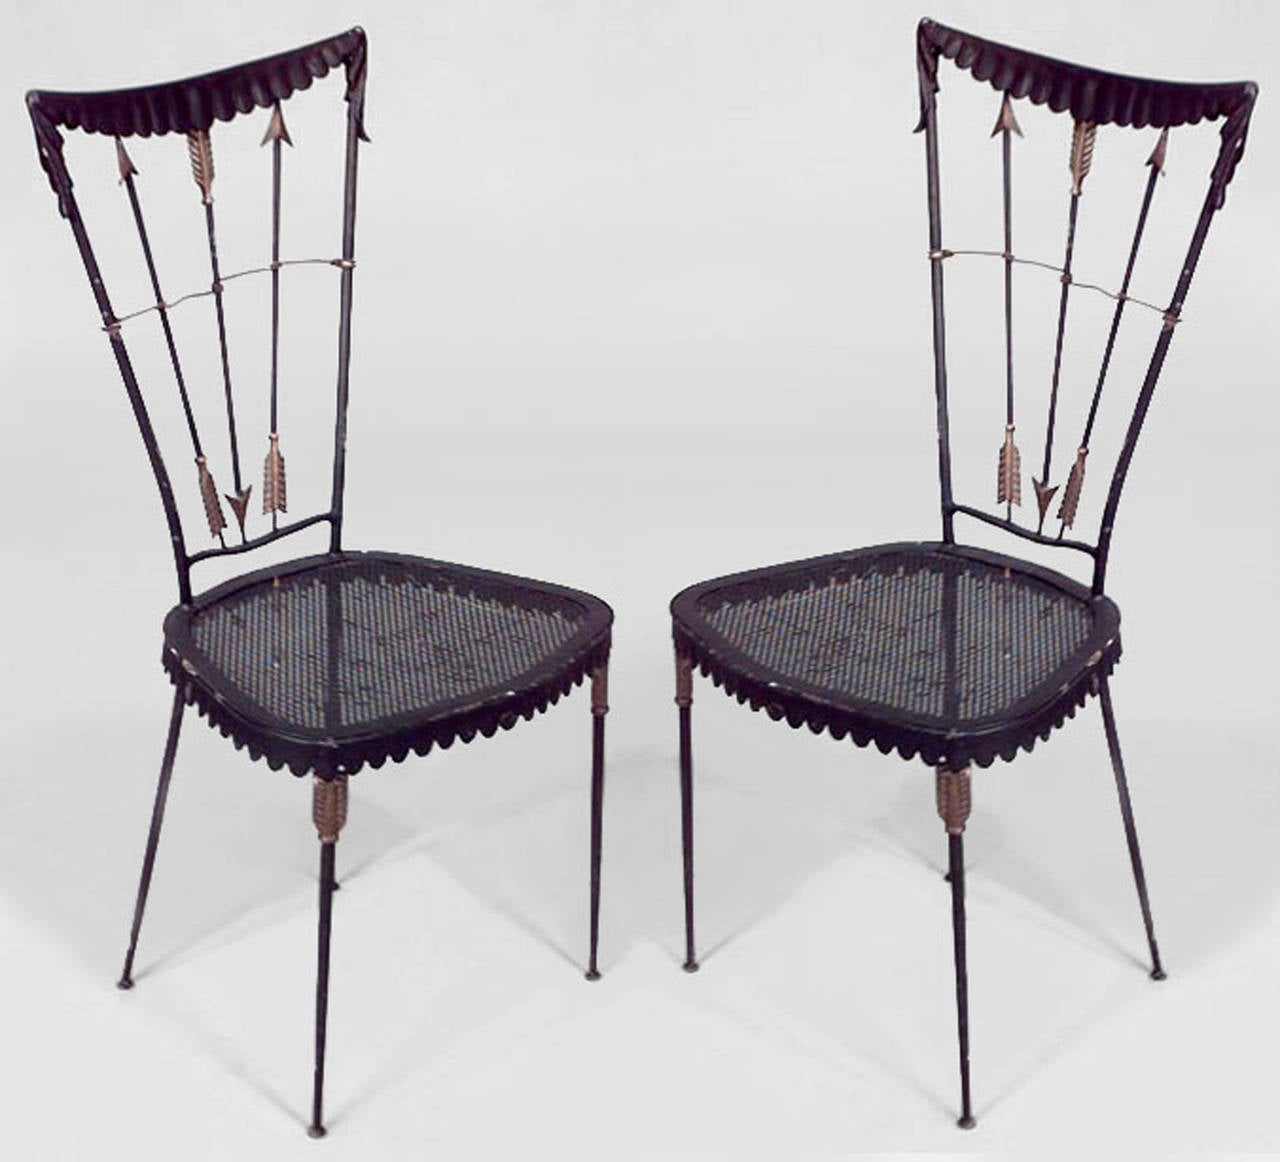 Pair of 1940's French black-painted metal side chairs with arrow design backs and perforated seats over four thin splayed legs.